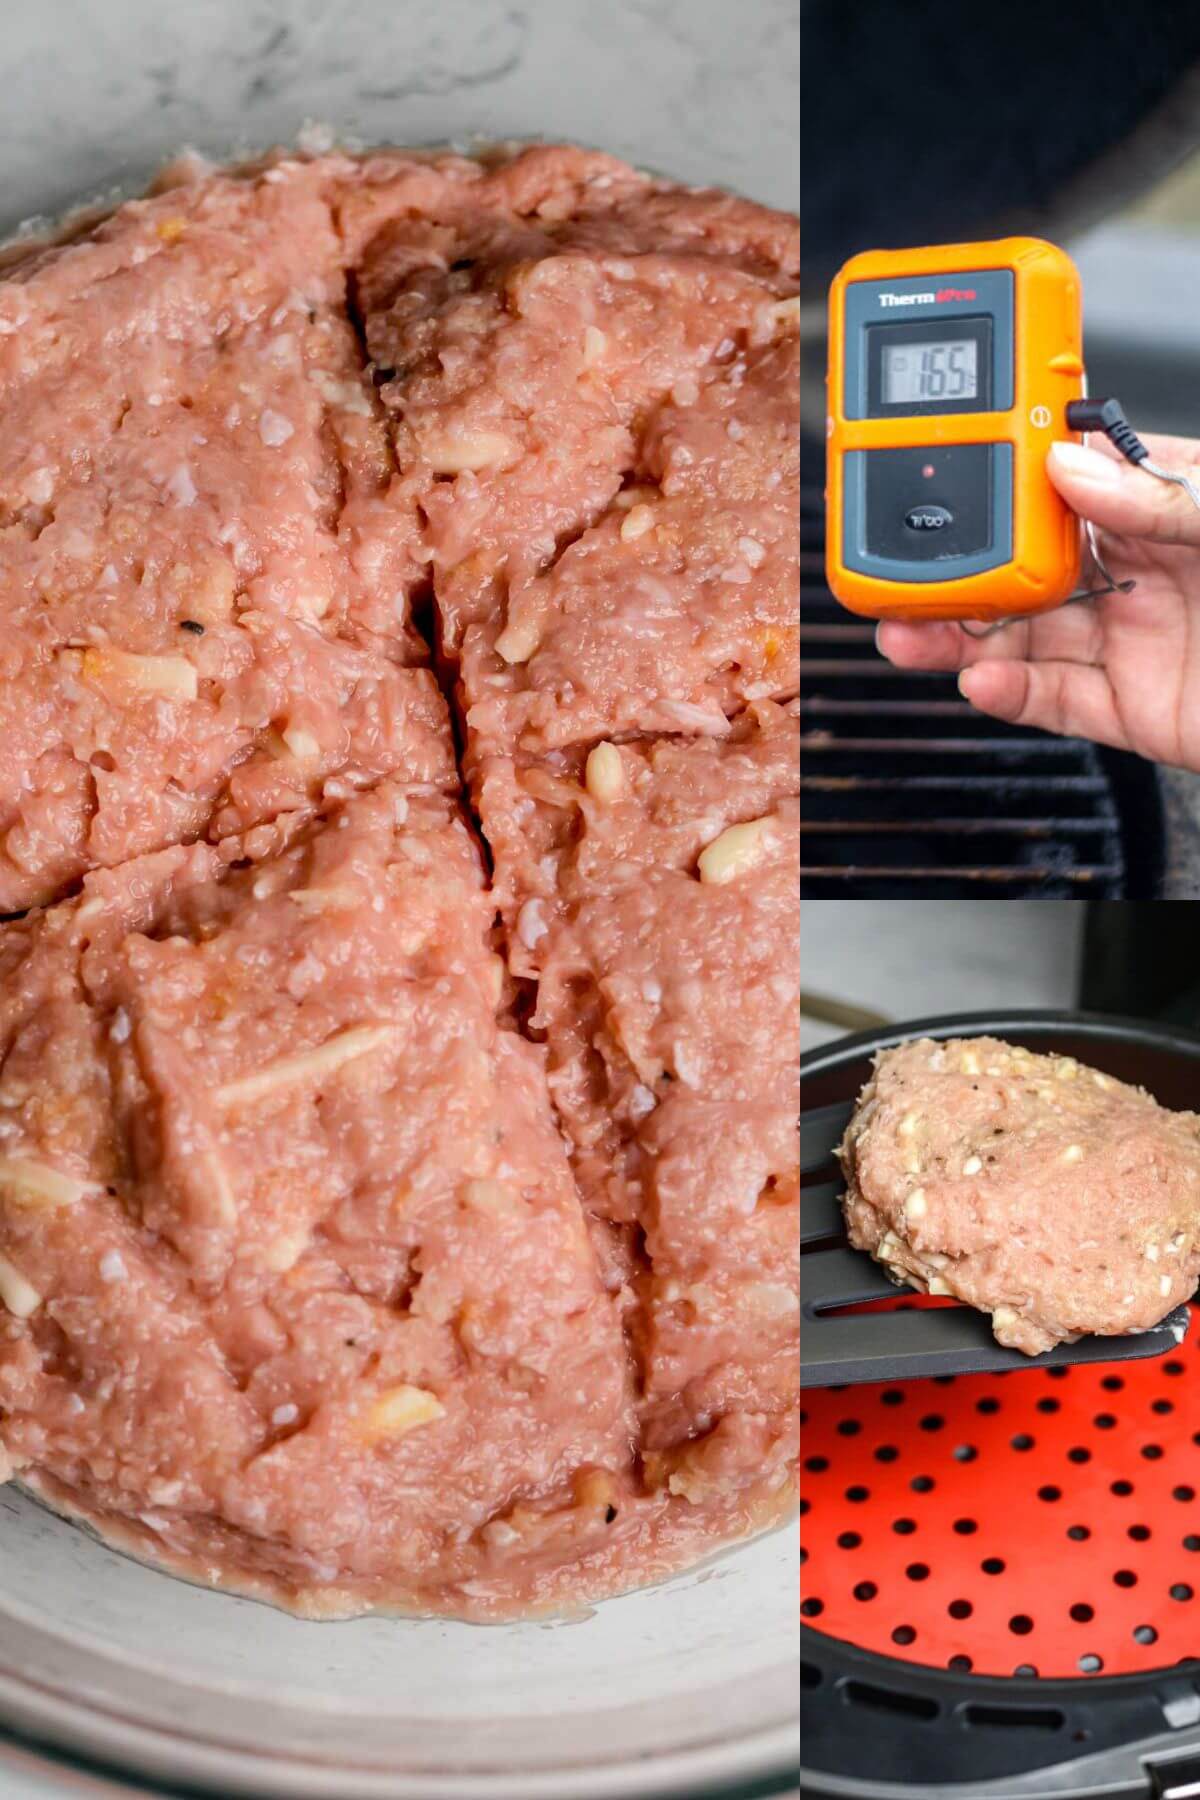 Images showing ground turkey meat, digital meat thermometer, and turkey meat patties.